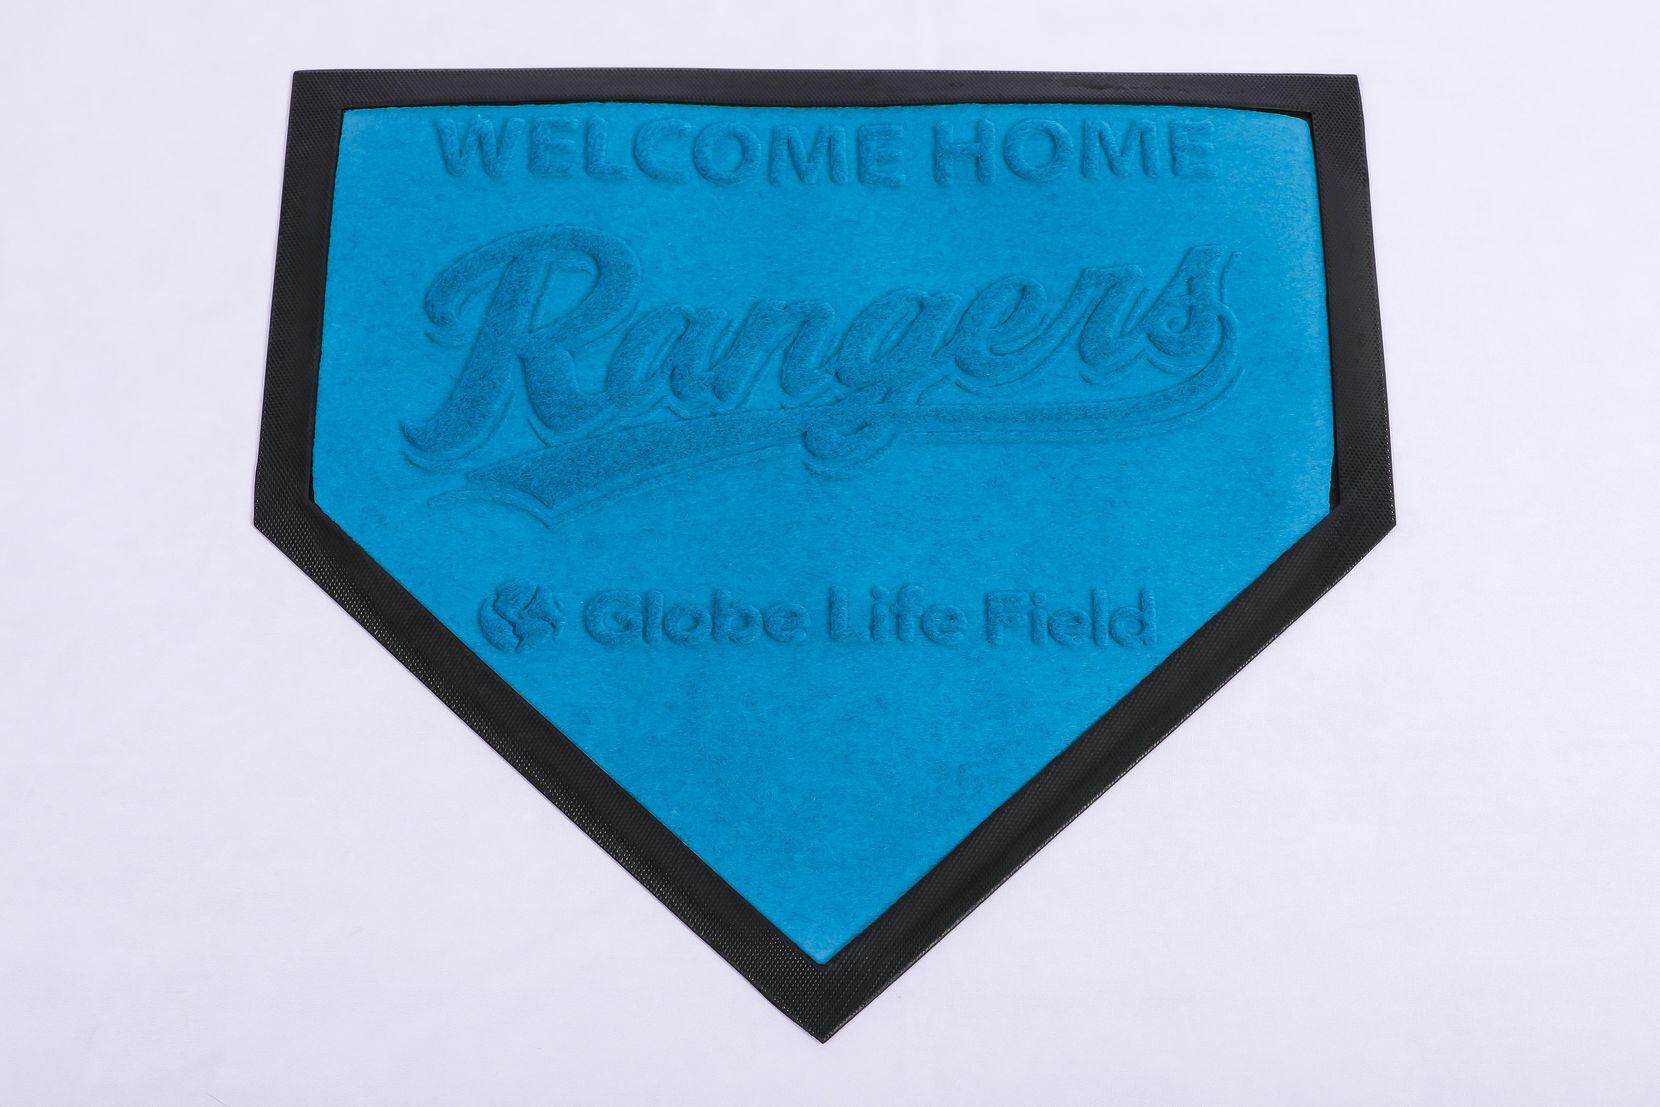 Rangers "Welcome Home" mat to be handed out April 4.